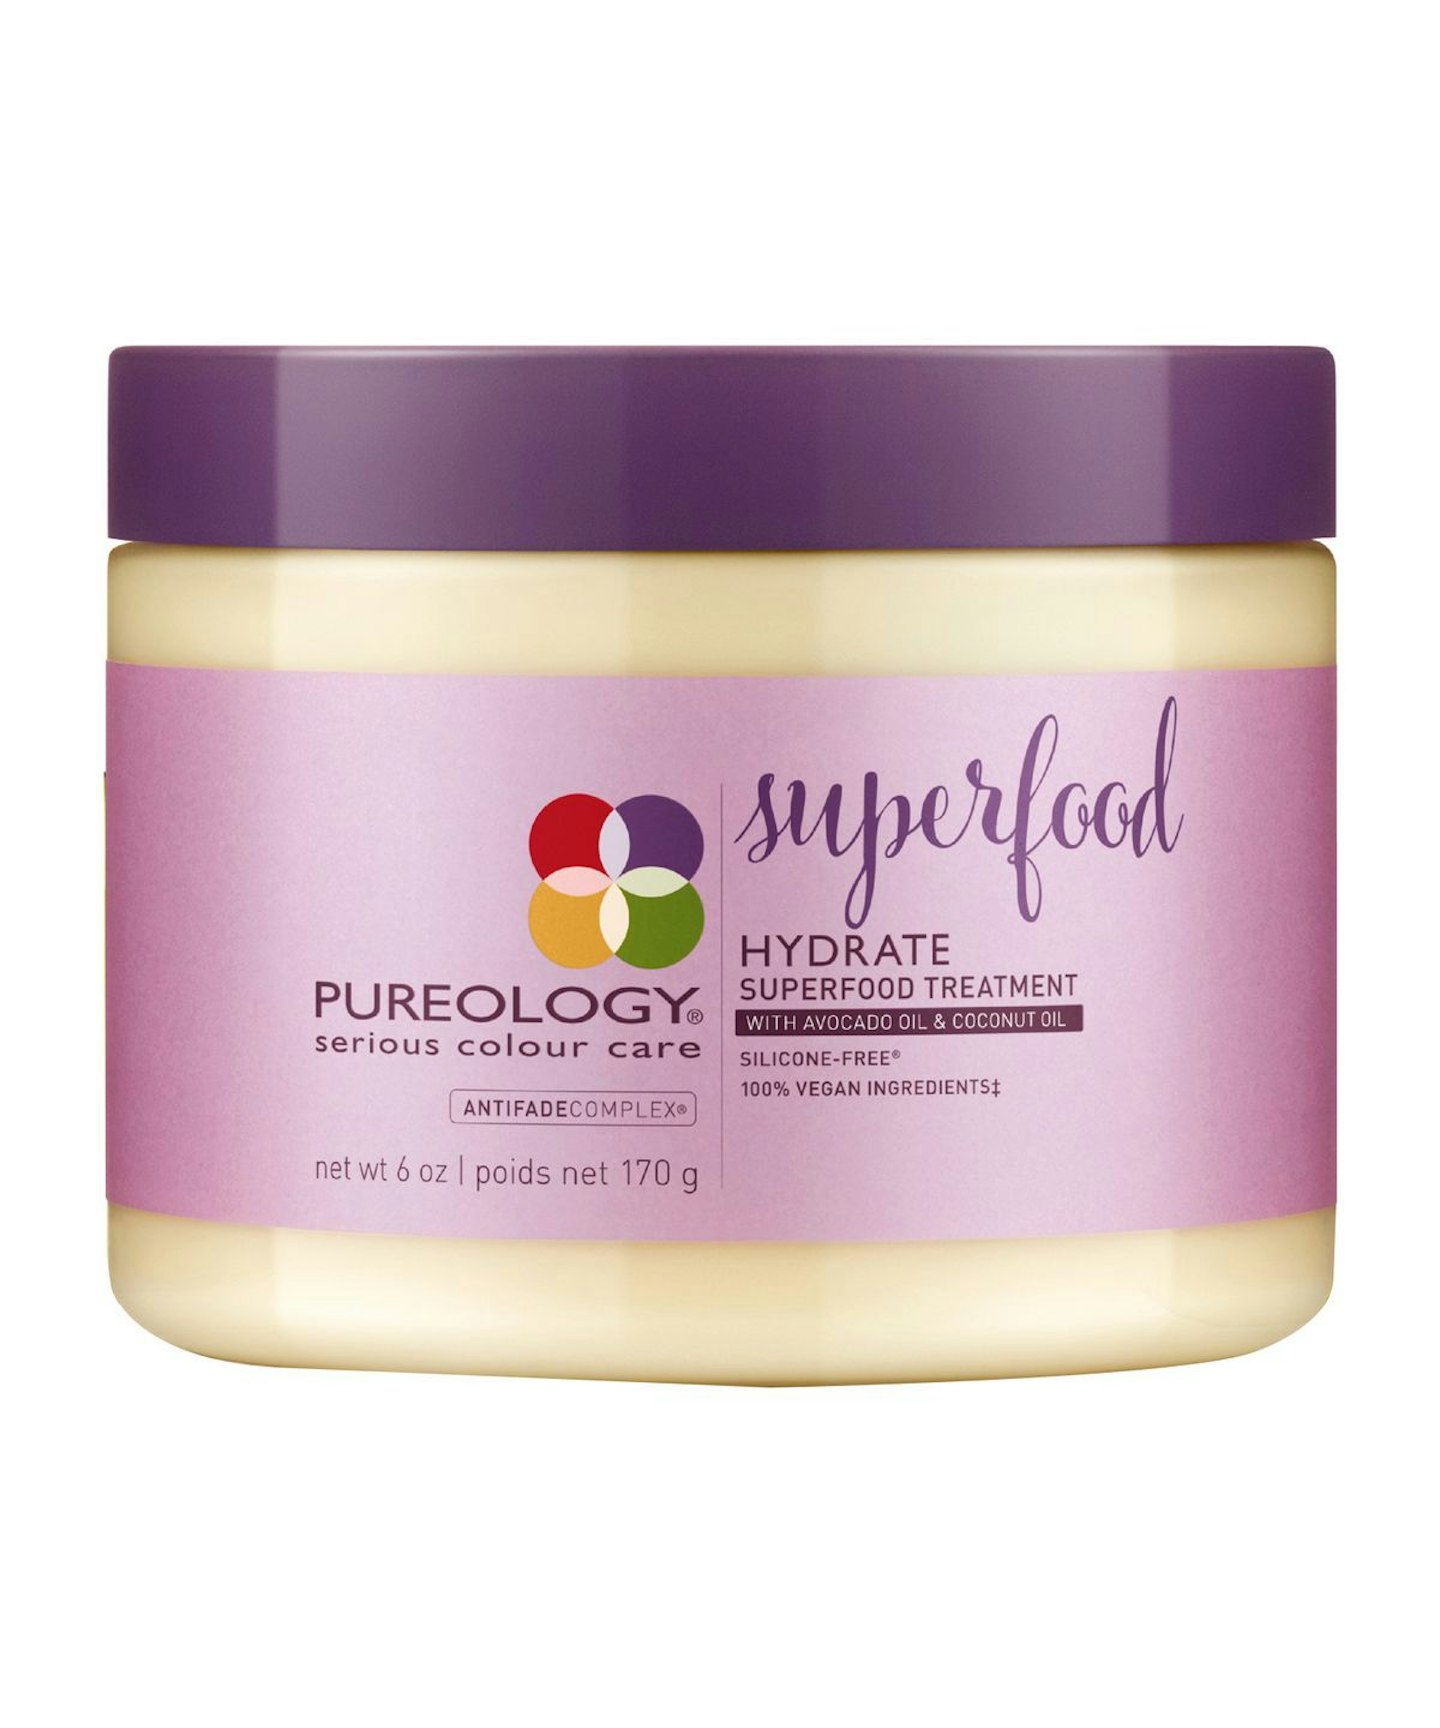 Pureology Pure Hydrate Superfood Mask, £28.55